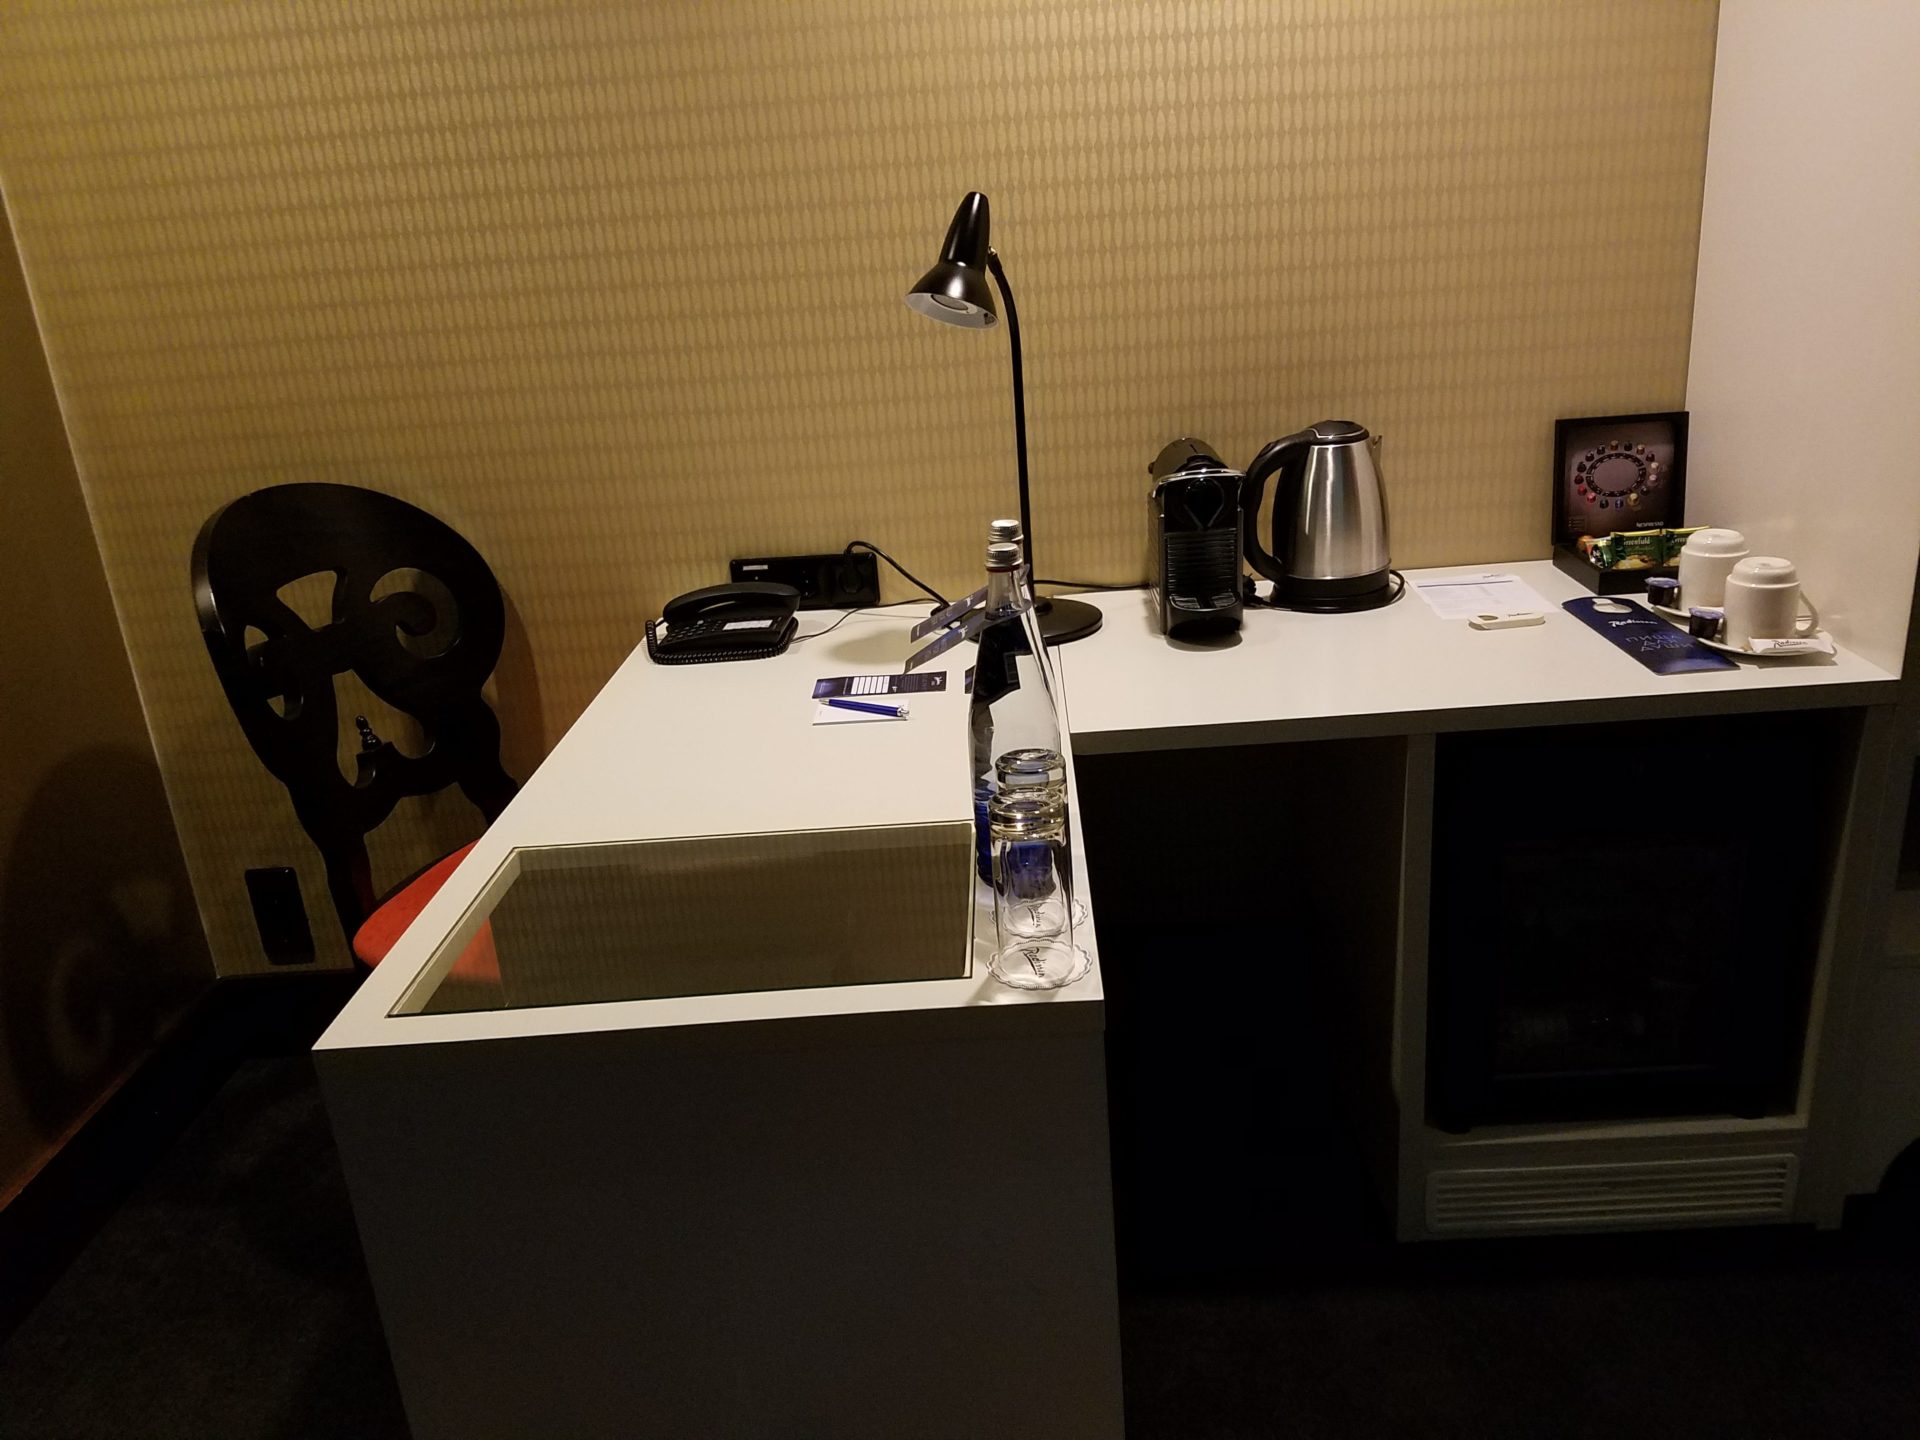 a desk with a lamp and a microwave